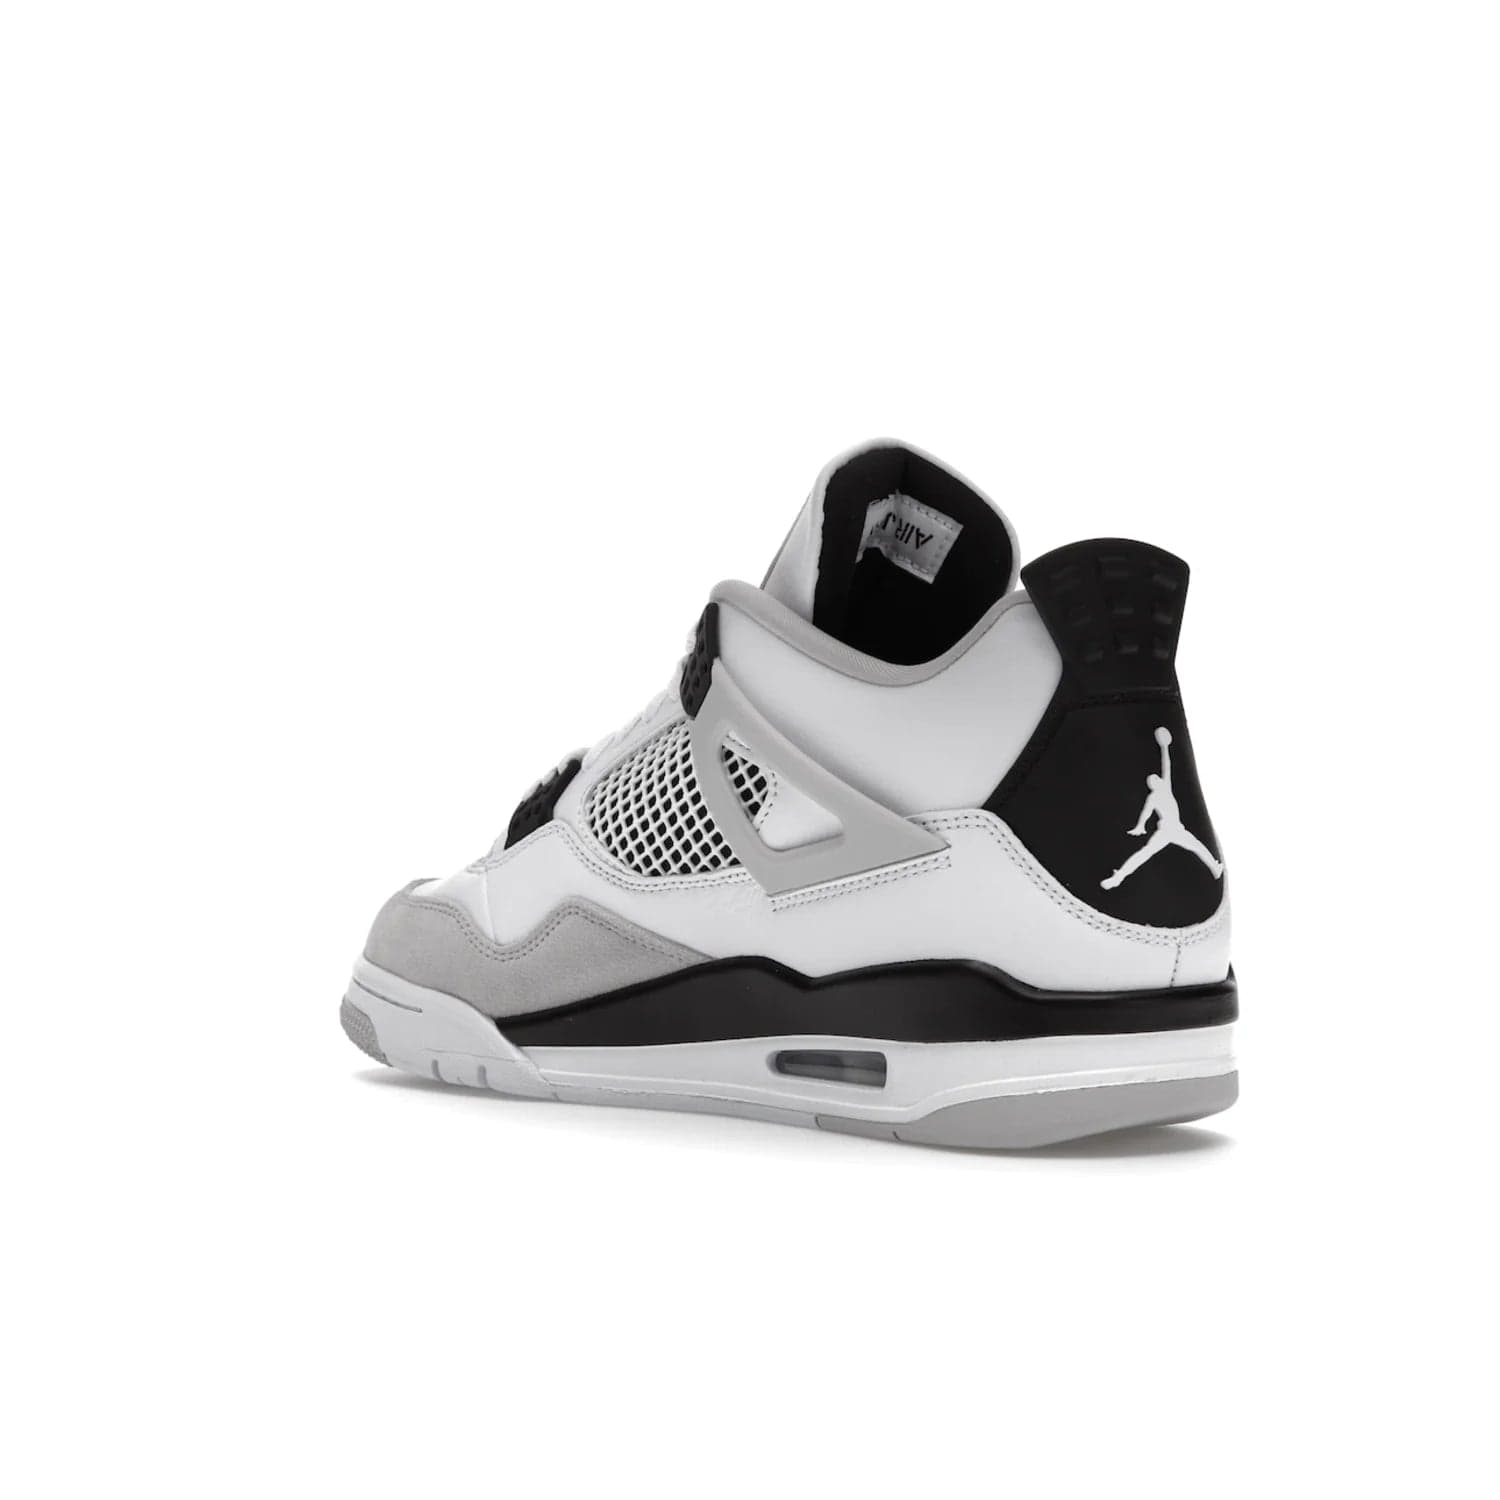 Jordan 4 Retro Military Black - Image 24 - Only at www.BallersClubKickz.com - Updated Air Jordan 4 style with a white/black/light grey sole and visible Air unit. Released in May 2022, offering timeless classic style and comfort.